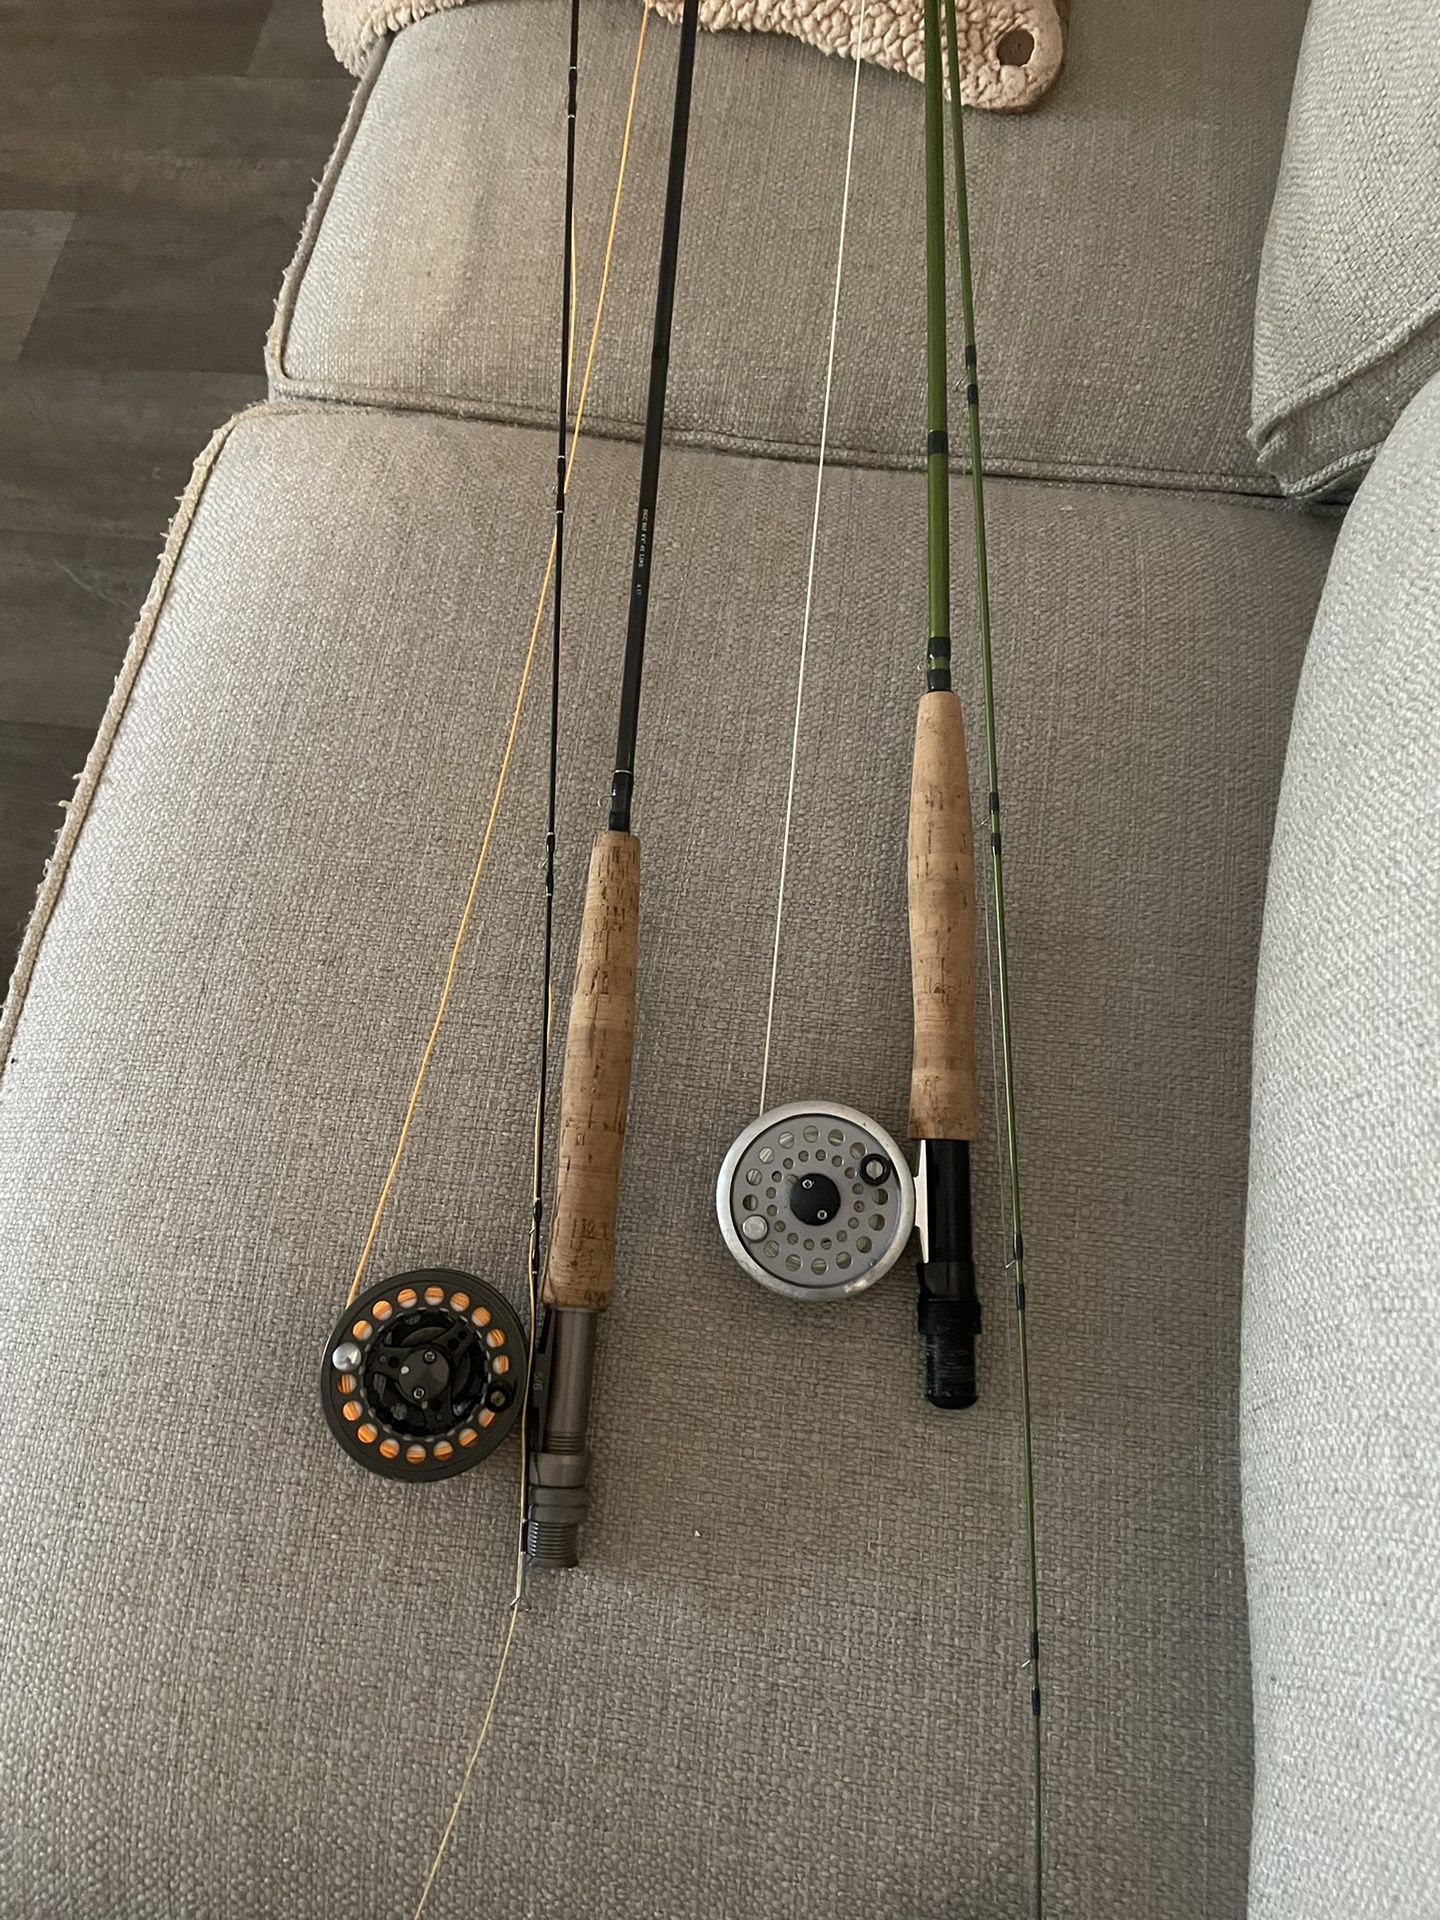 Fly Fishing Ross, Reels, And Flies 